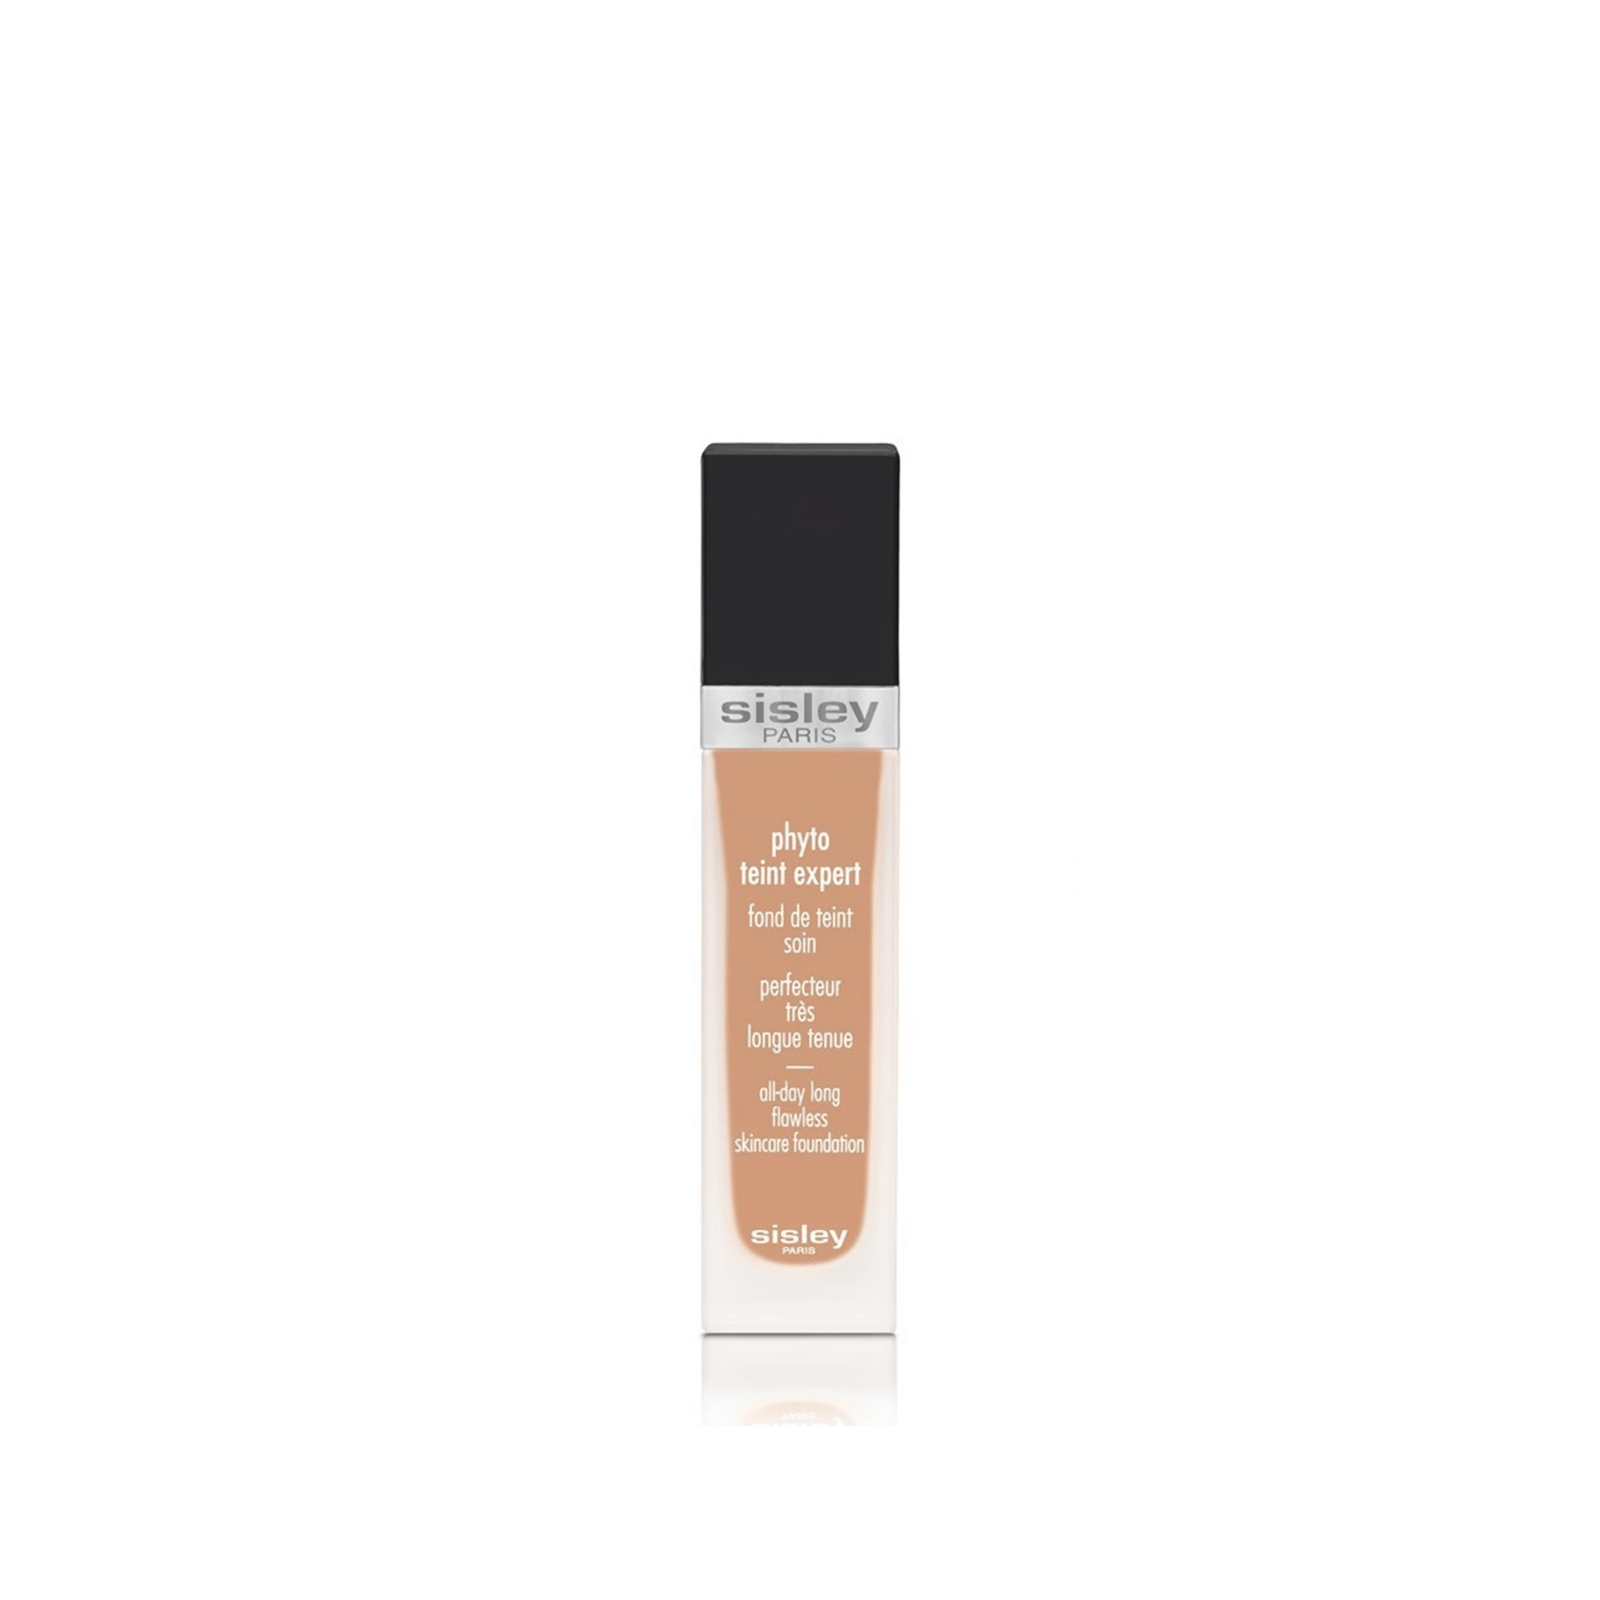 Sisley Paris Phyto Teint Expert All-Day Long Flawless Skincare Foundation 3 Natural 30ml (1floz)